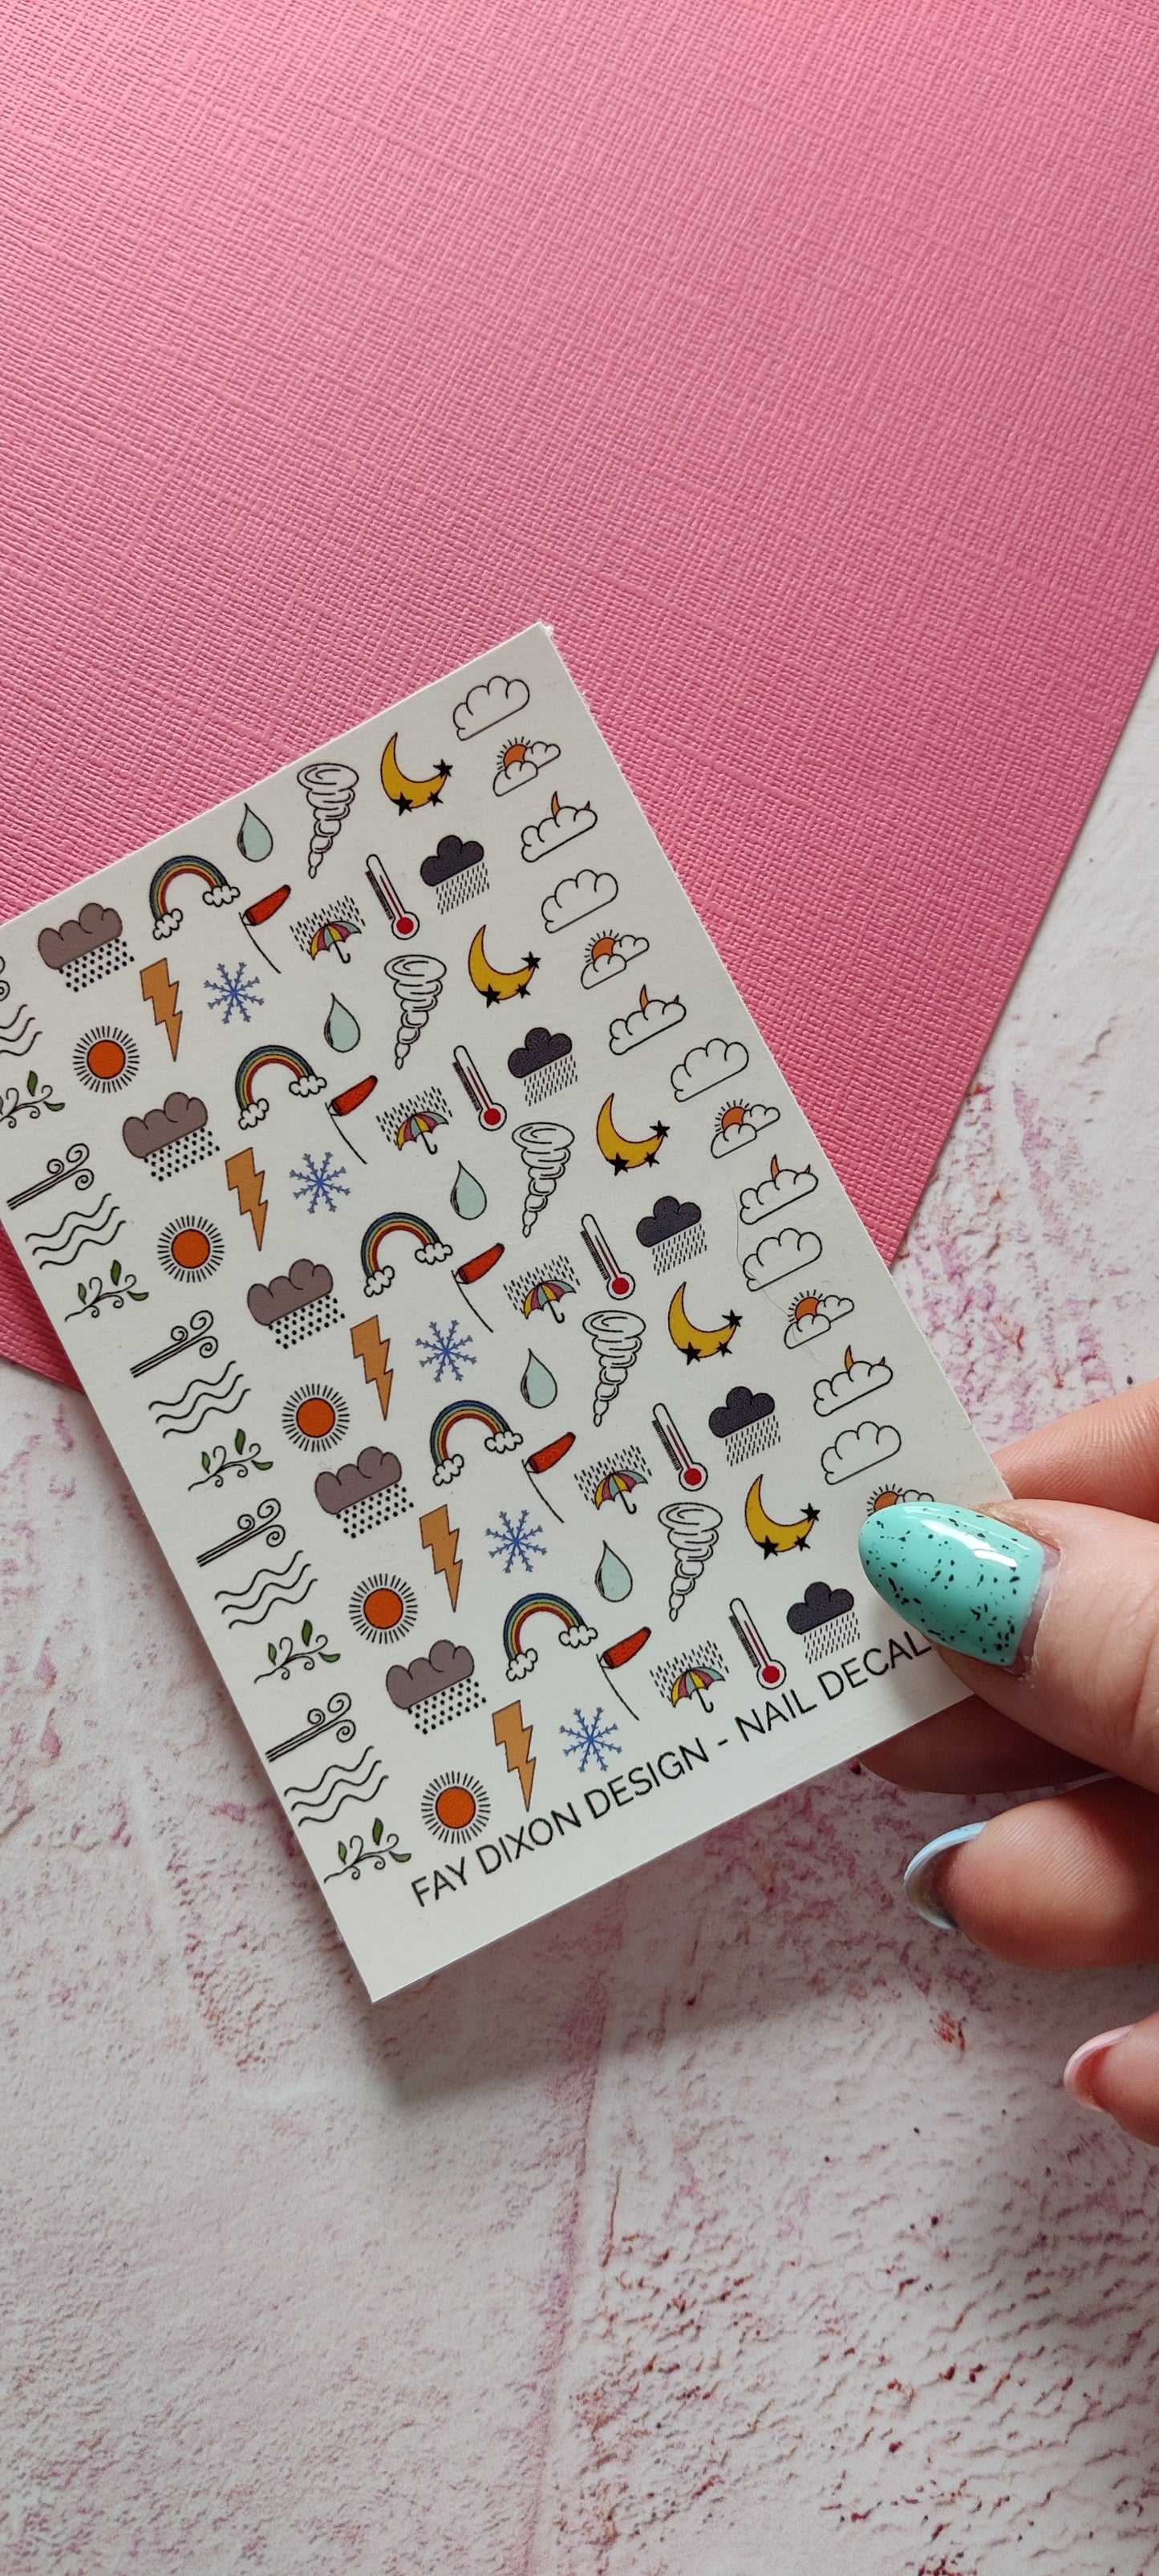 Cocktails and Shots Waterslide Nail Decals - Fay Dixon Design